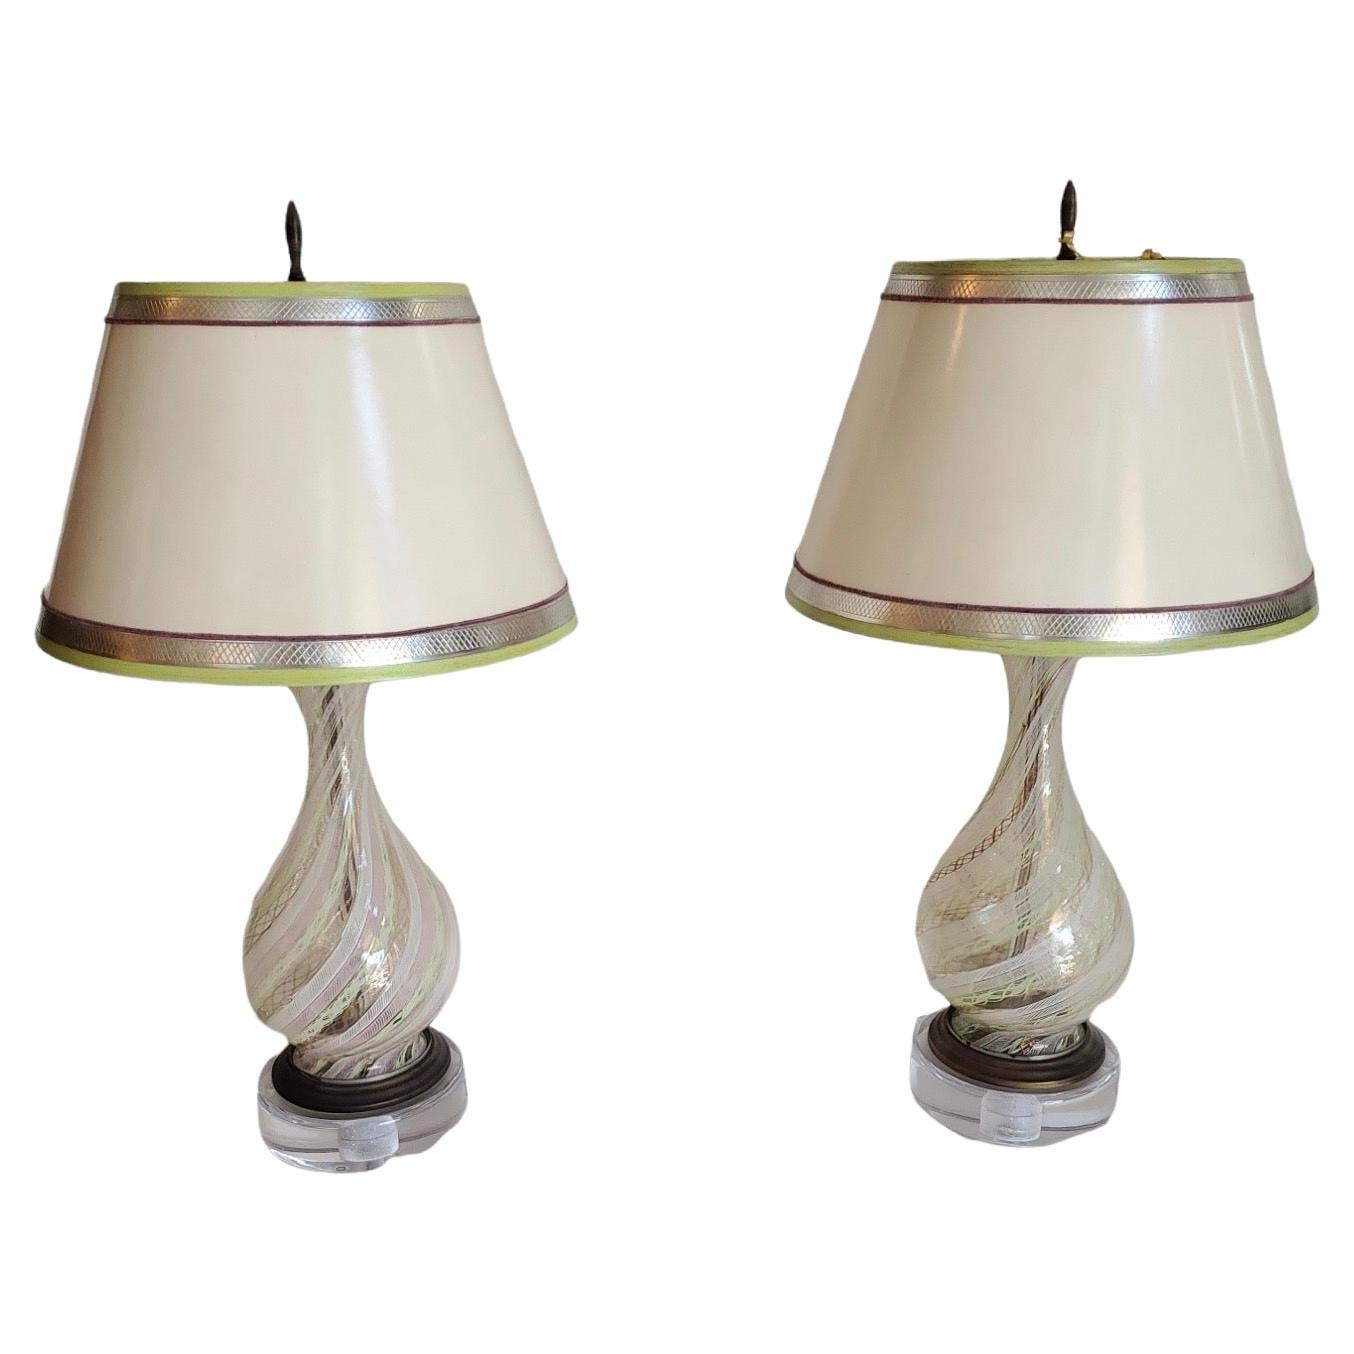 Pair of Vintage Murano Lattochino Lamps For Sale